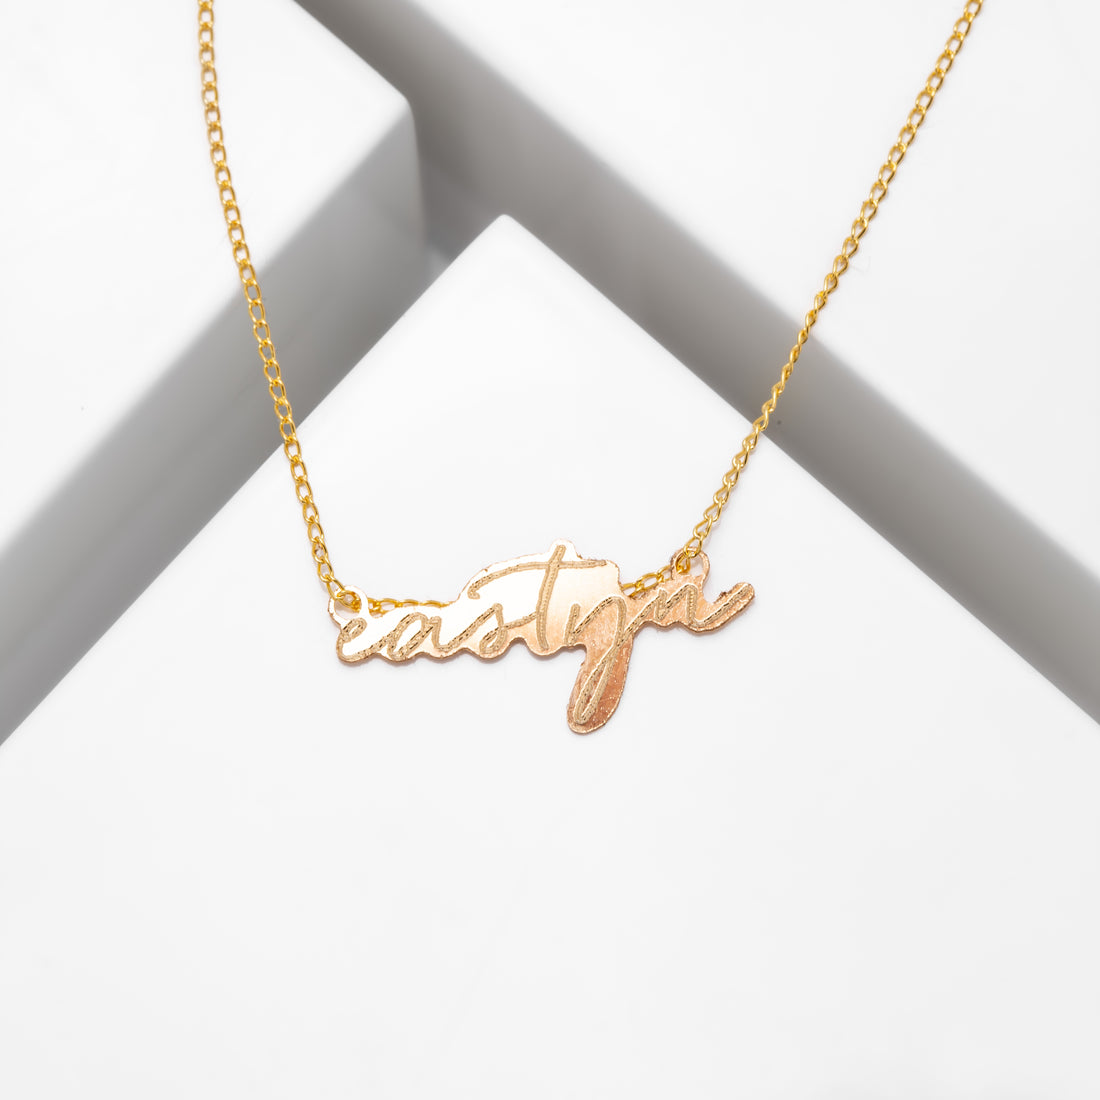 personalized engraved necklace in 14k gold filled or sterling silver